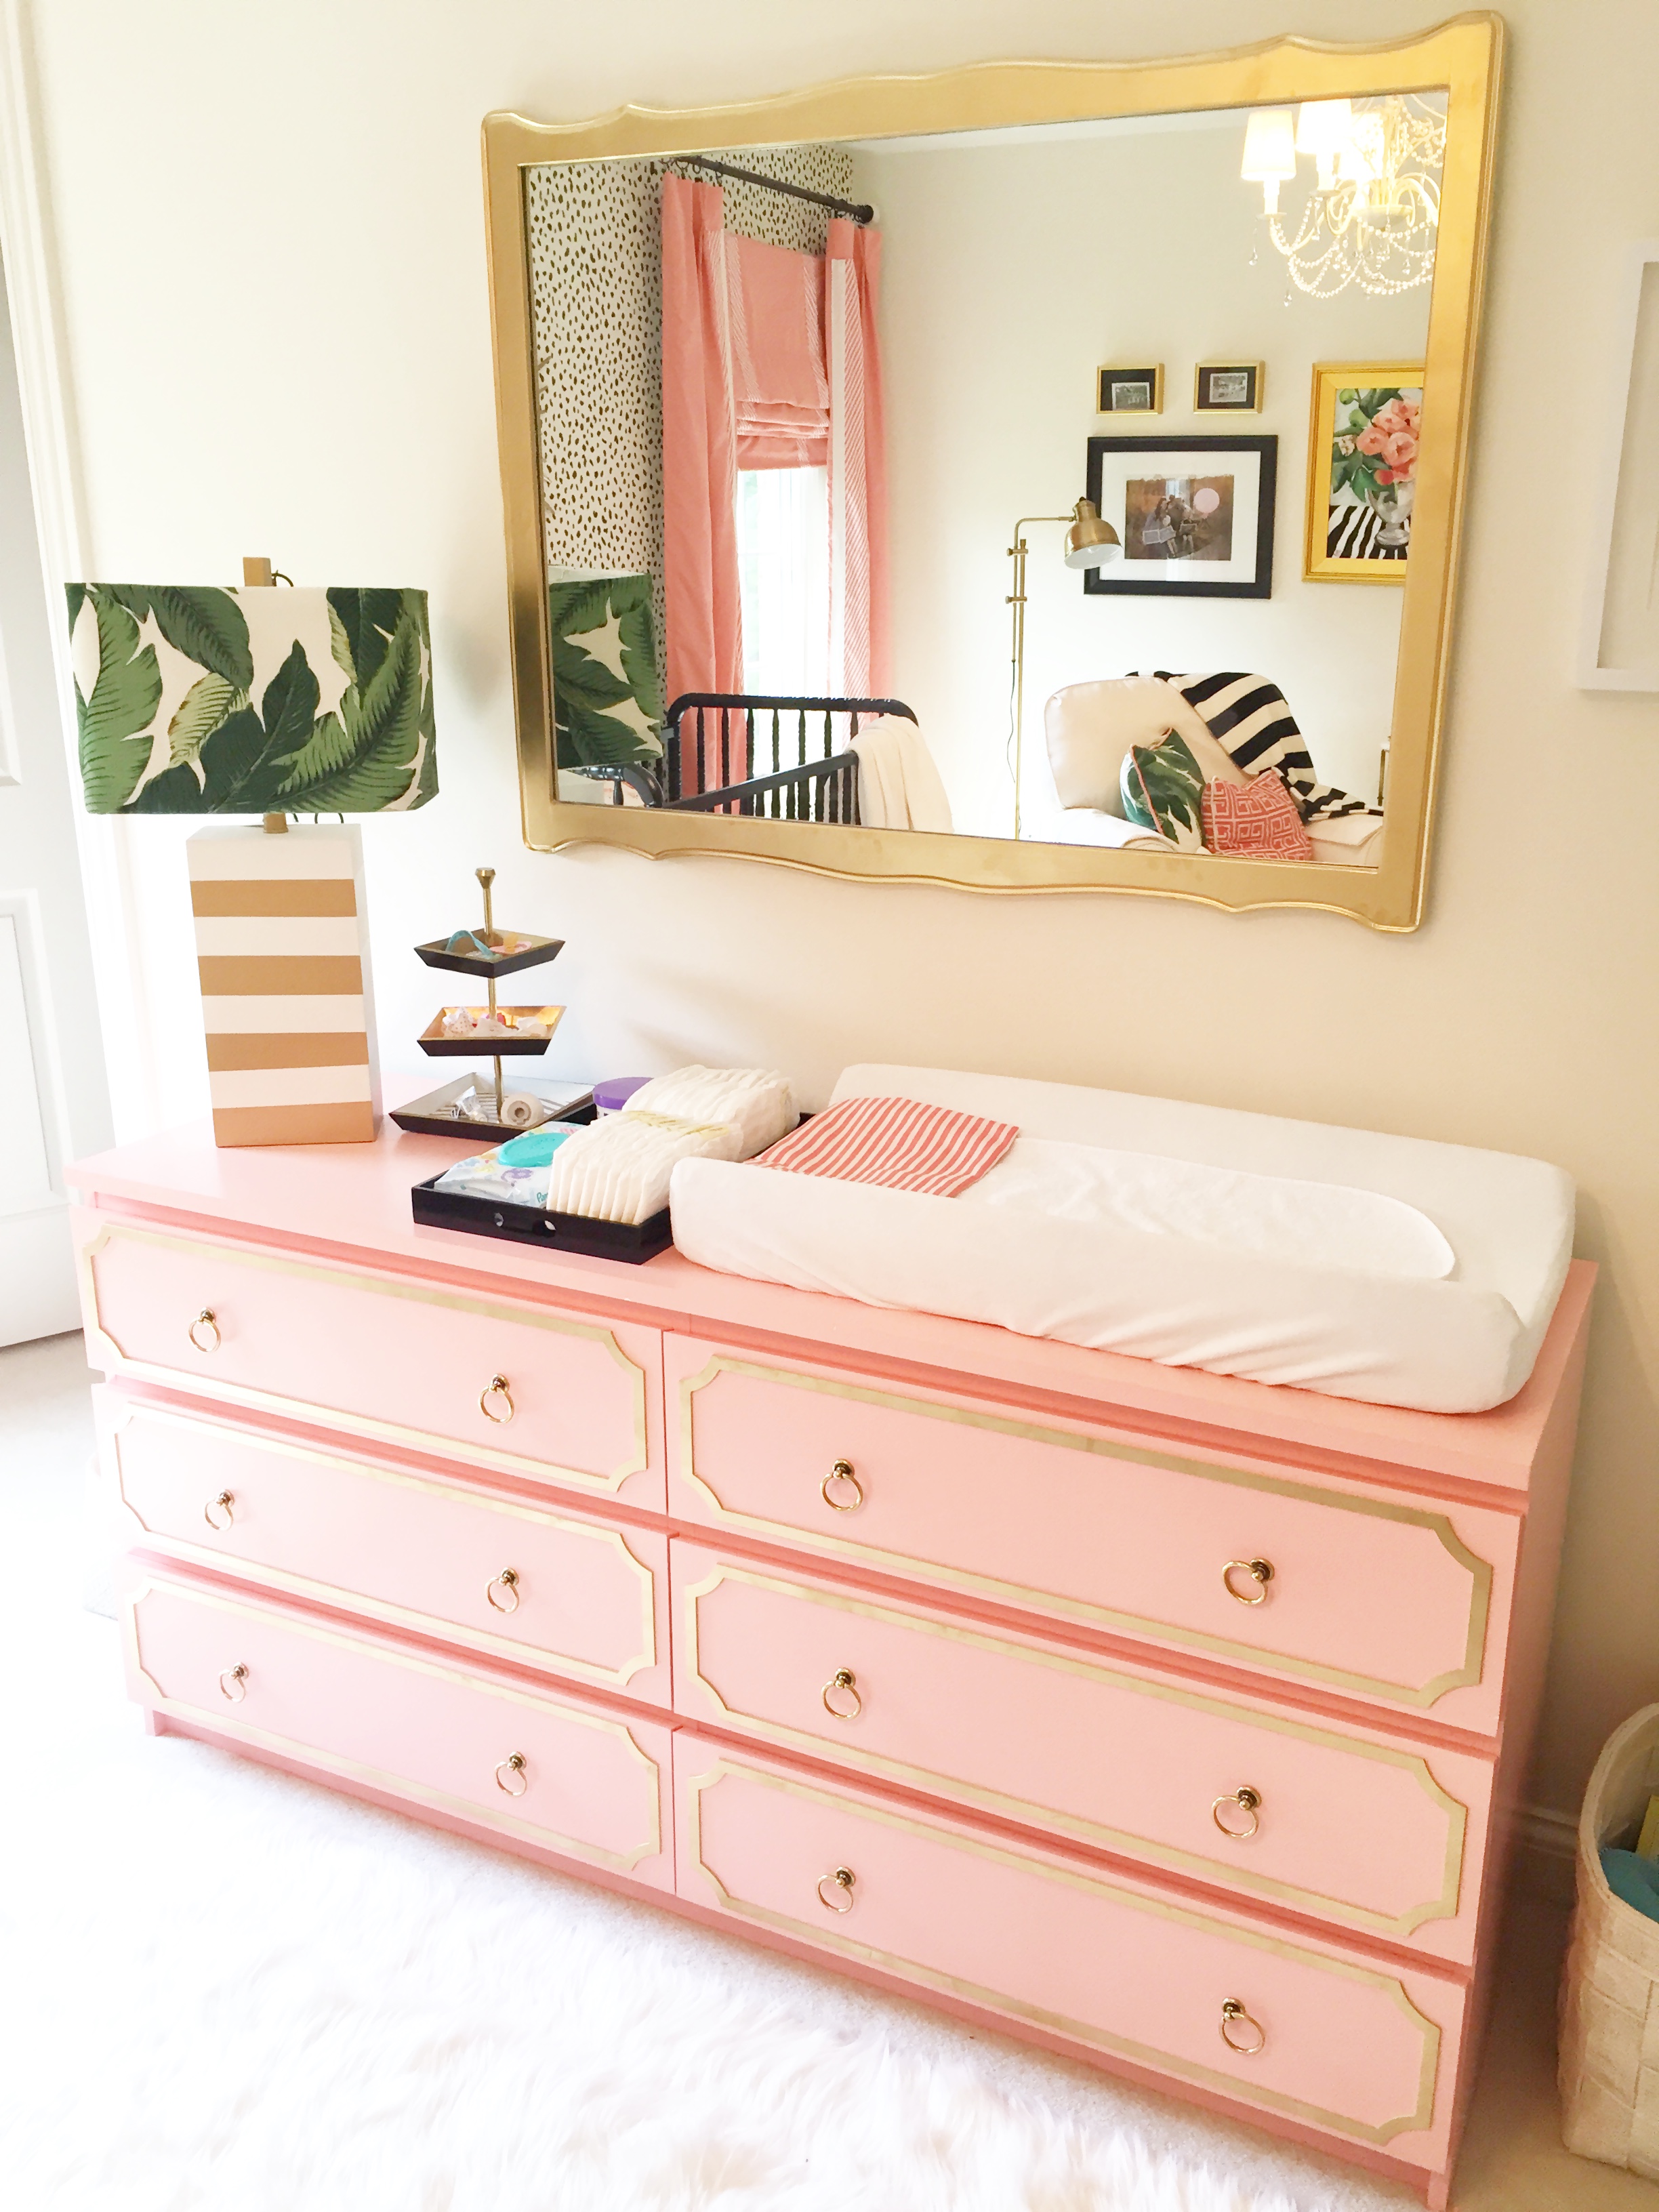 IKEA Malm painted with Glidden Light Coral Sunset